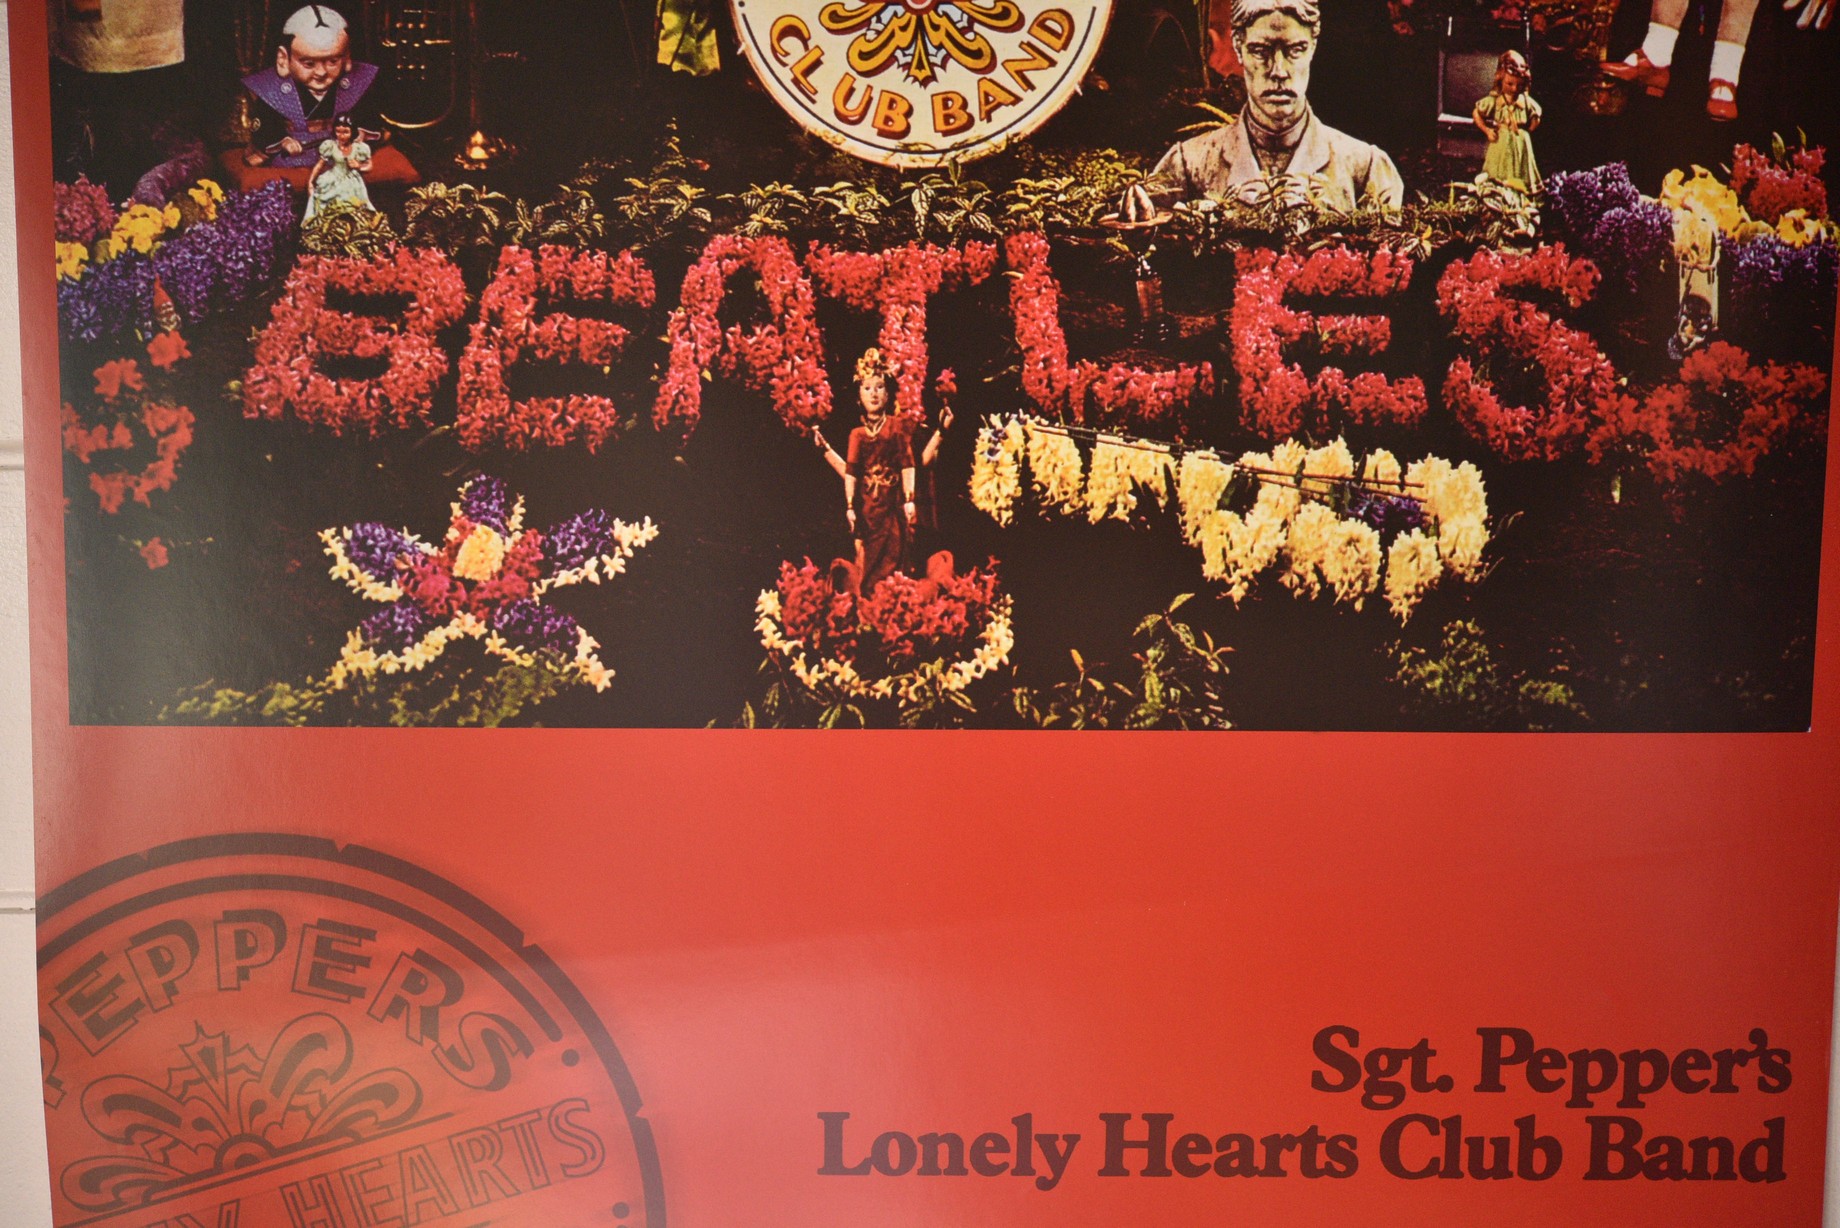 THE BEATLES SERGEANT PEPPERS LONELY HEARTS CLUB BAND POSTER 91.5cm x 61cm LP0905 